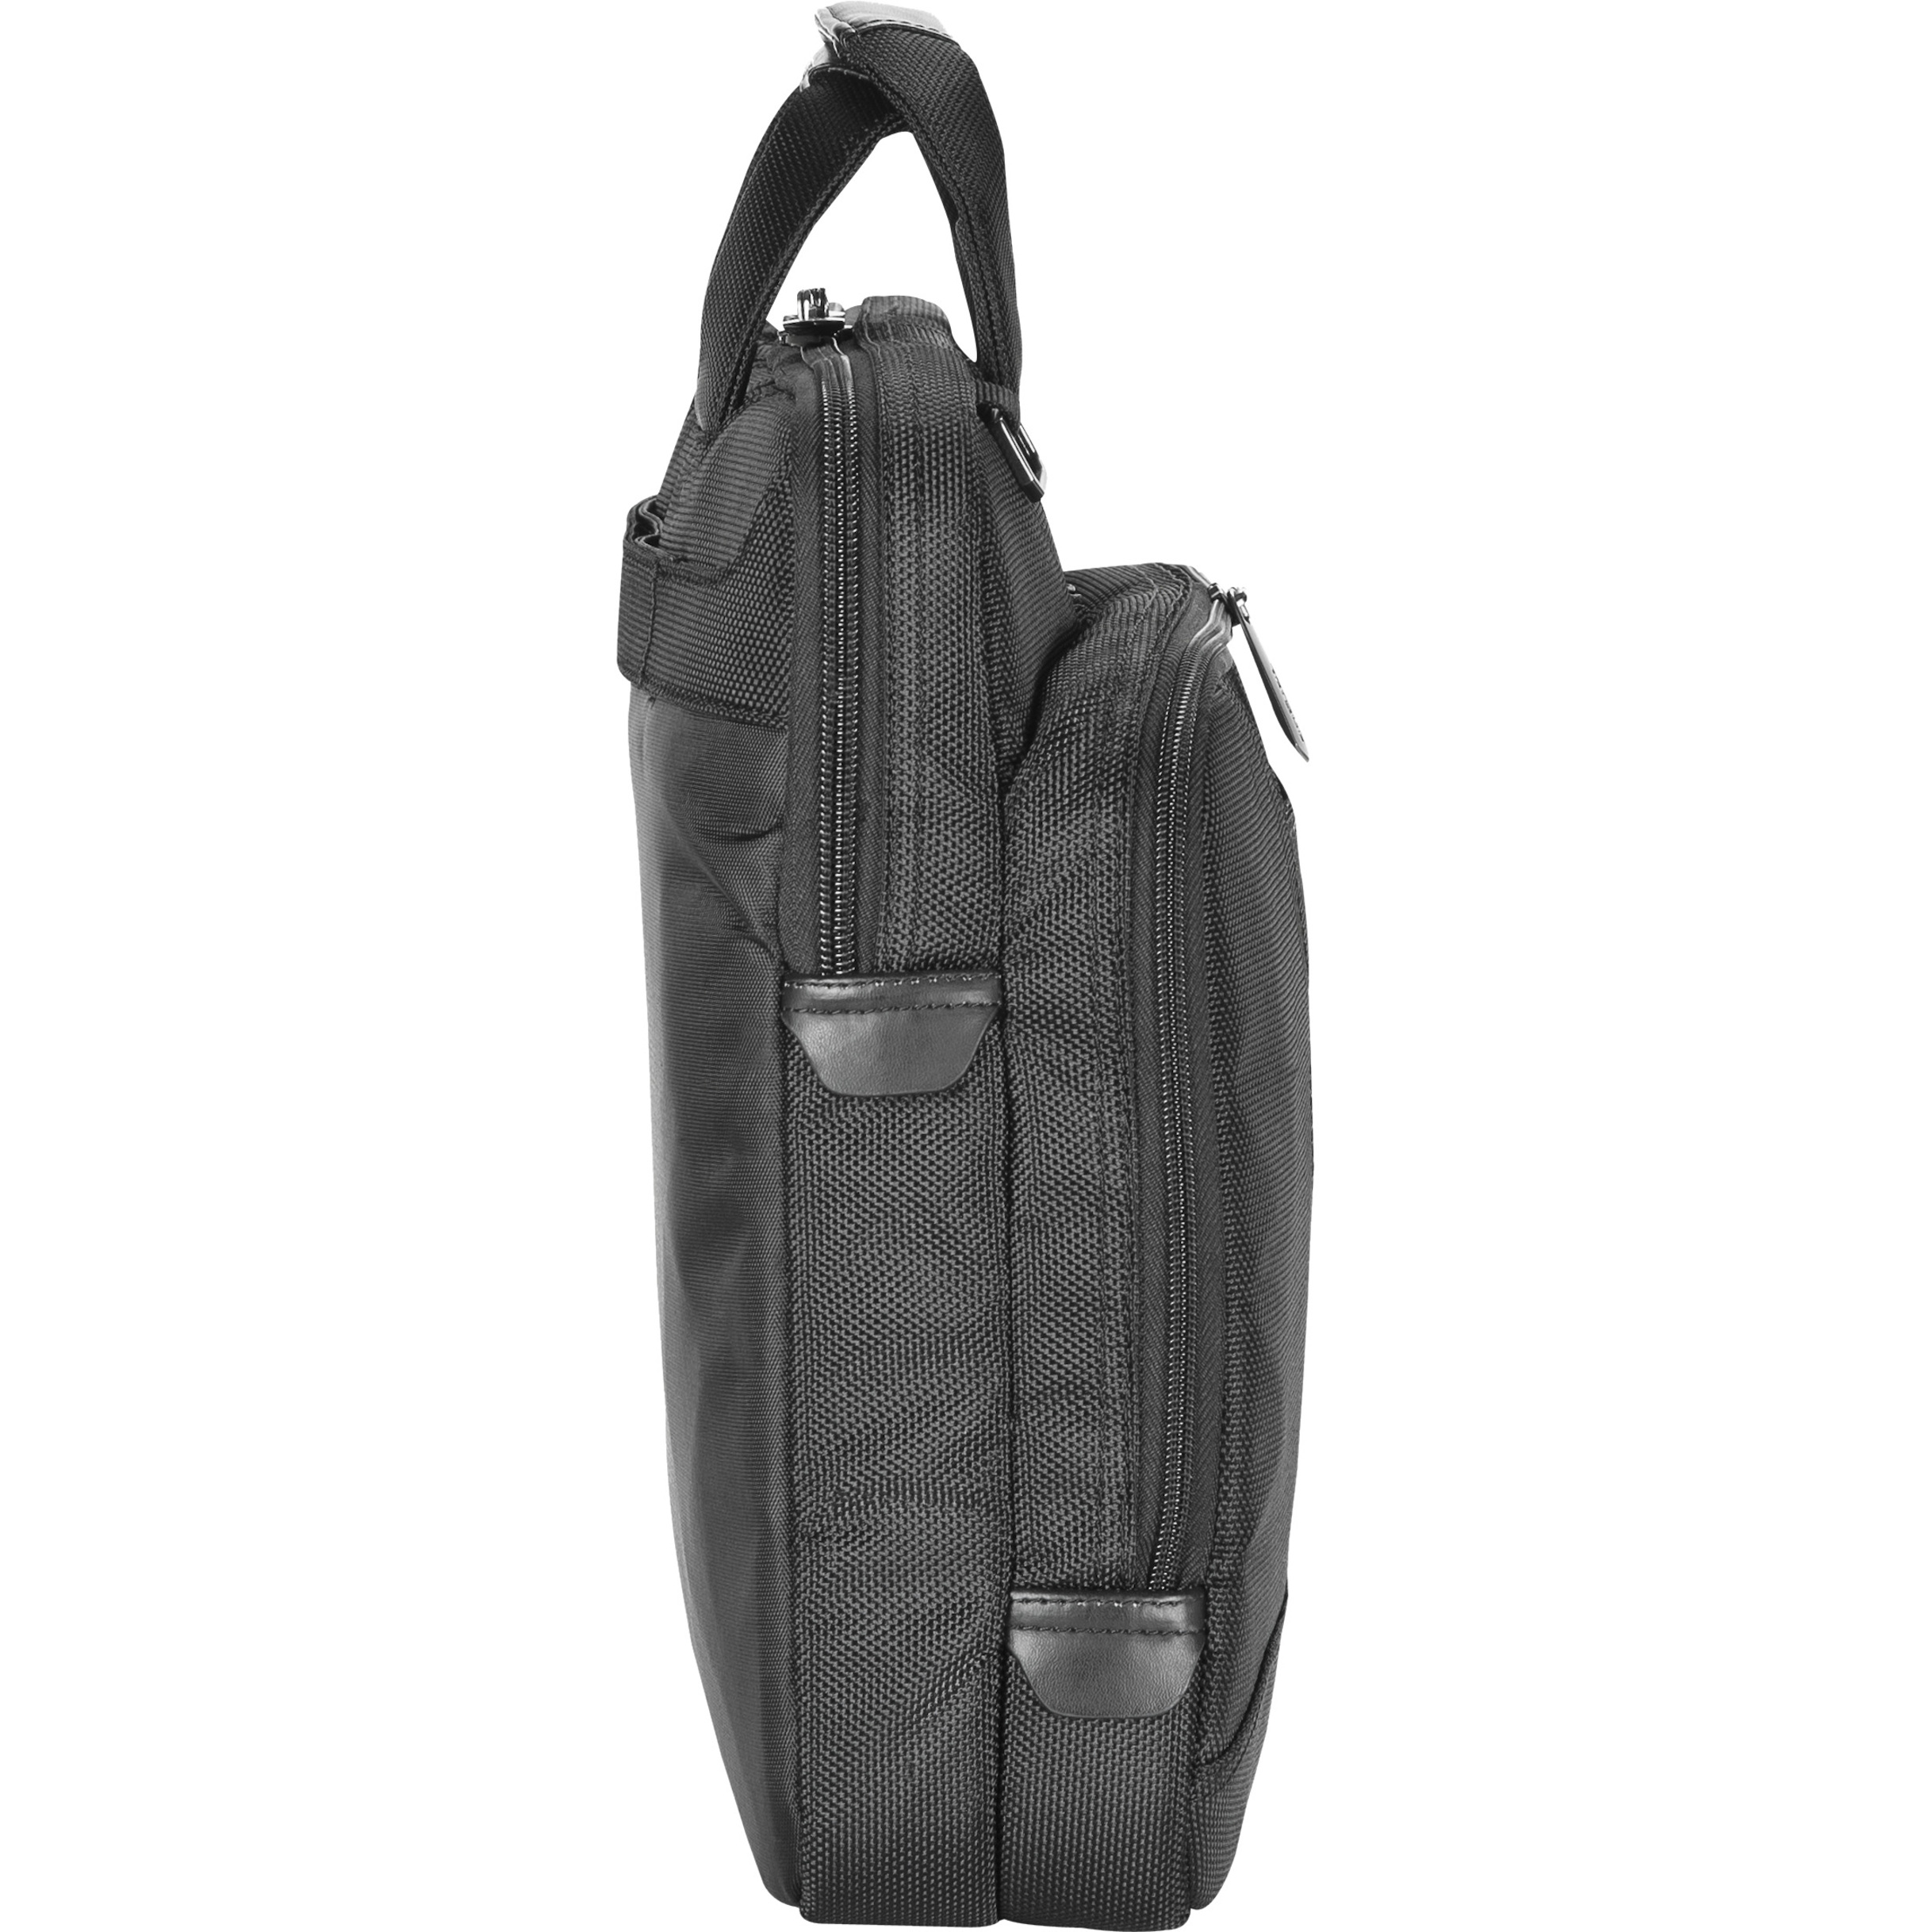 Targus Corporate Traveler CUCT02UT14 Carrying Case for 14" Notebook - image 3 of 3